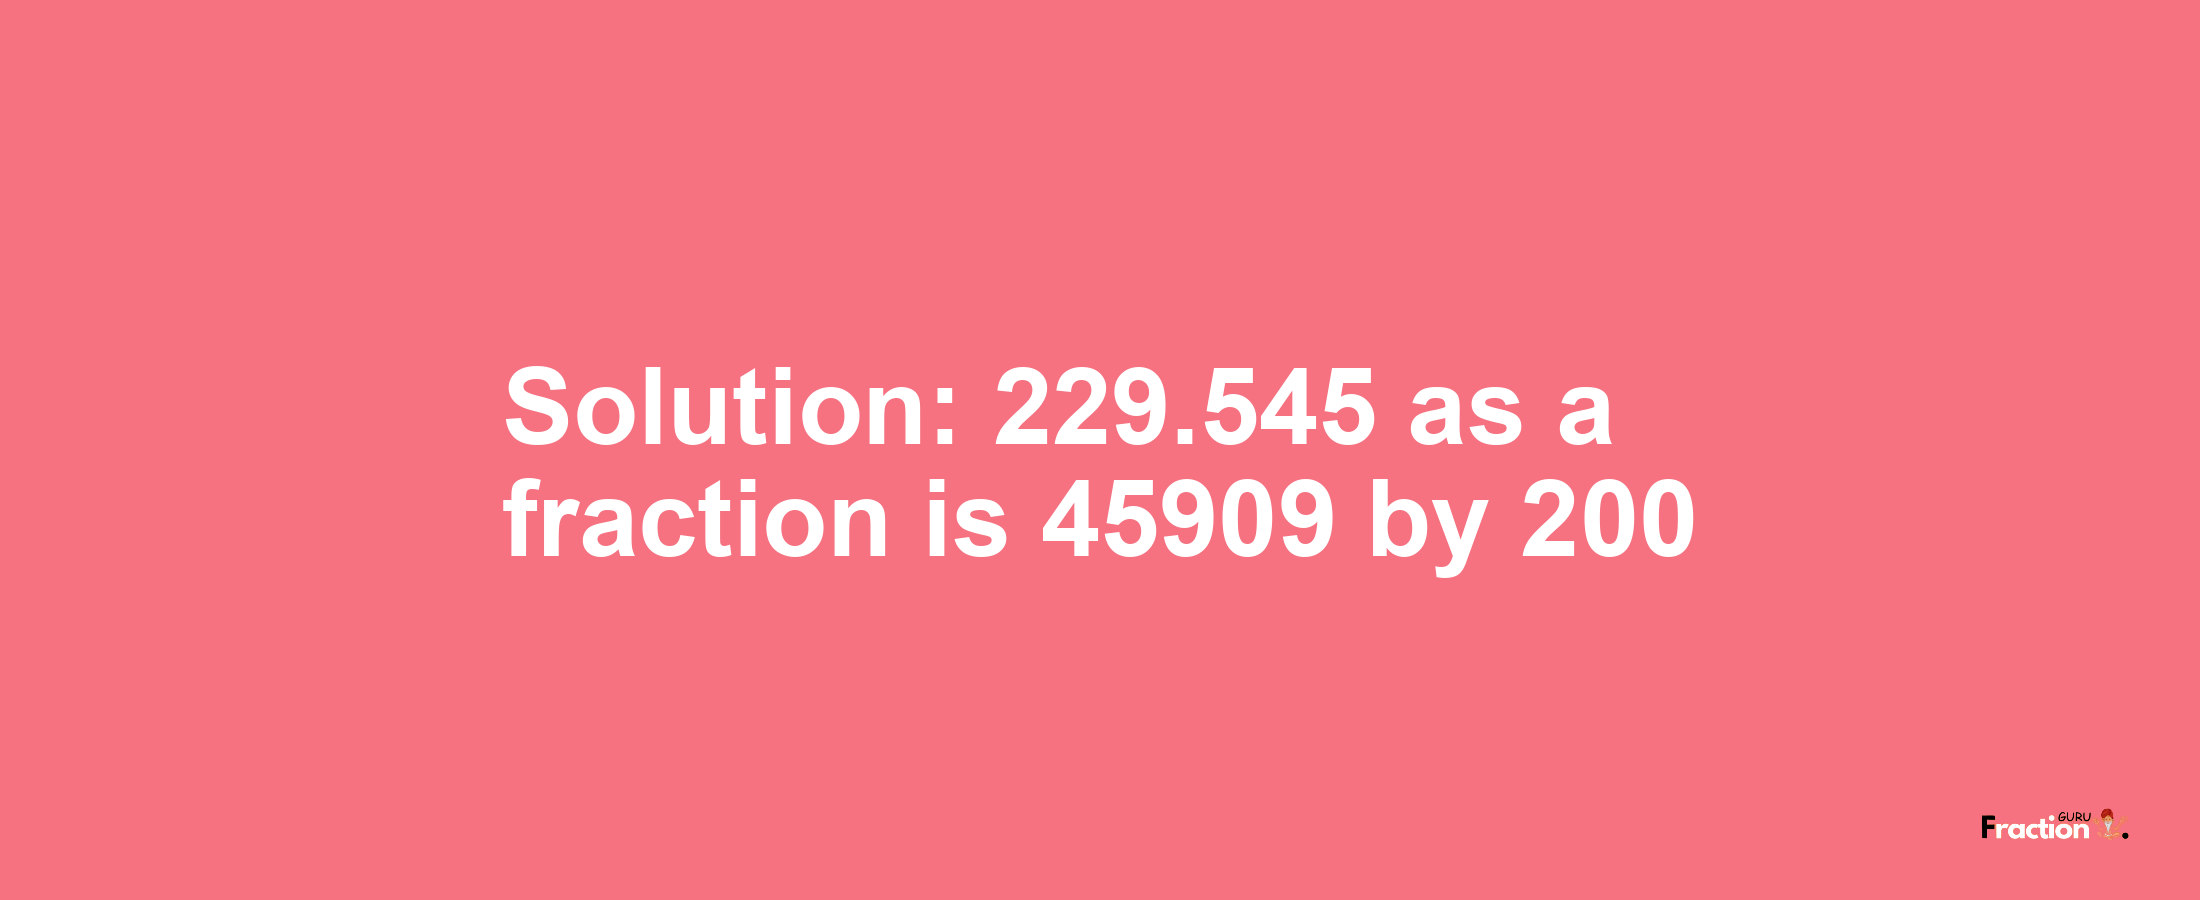 Solution:229.545 as a fraction is 45909/200